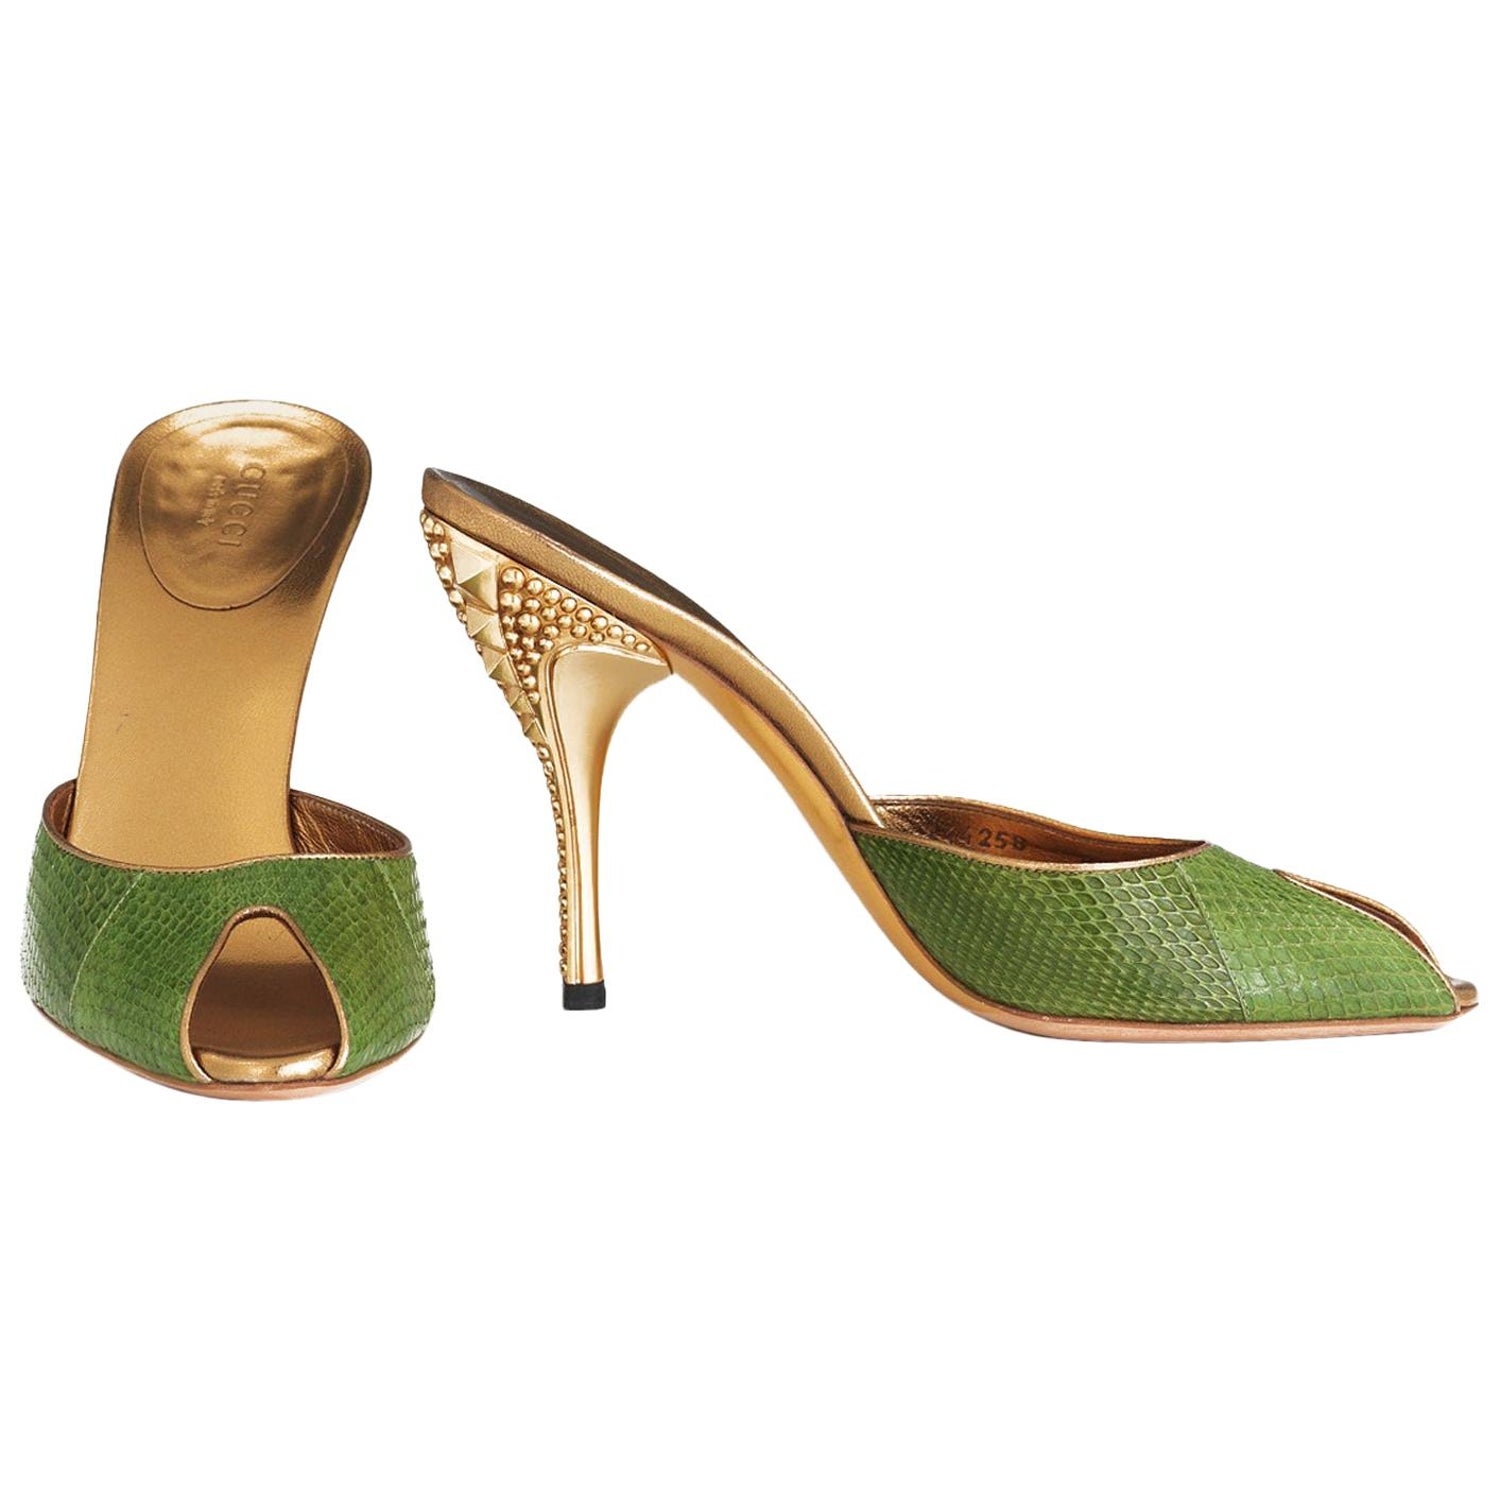 Gucci Snake Mule - For Sale on 1stDibs | gucci snake mules, gucci snake  heels, gucci mules heels